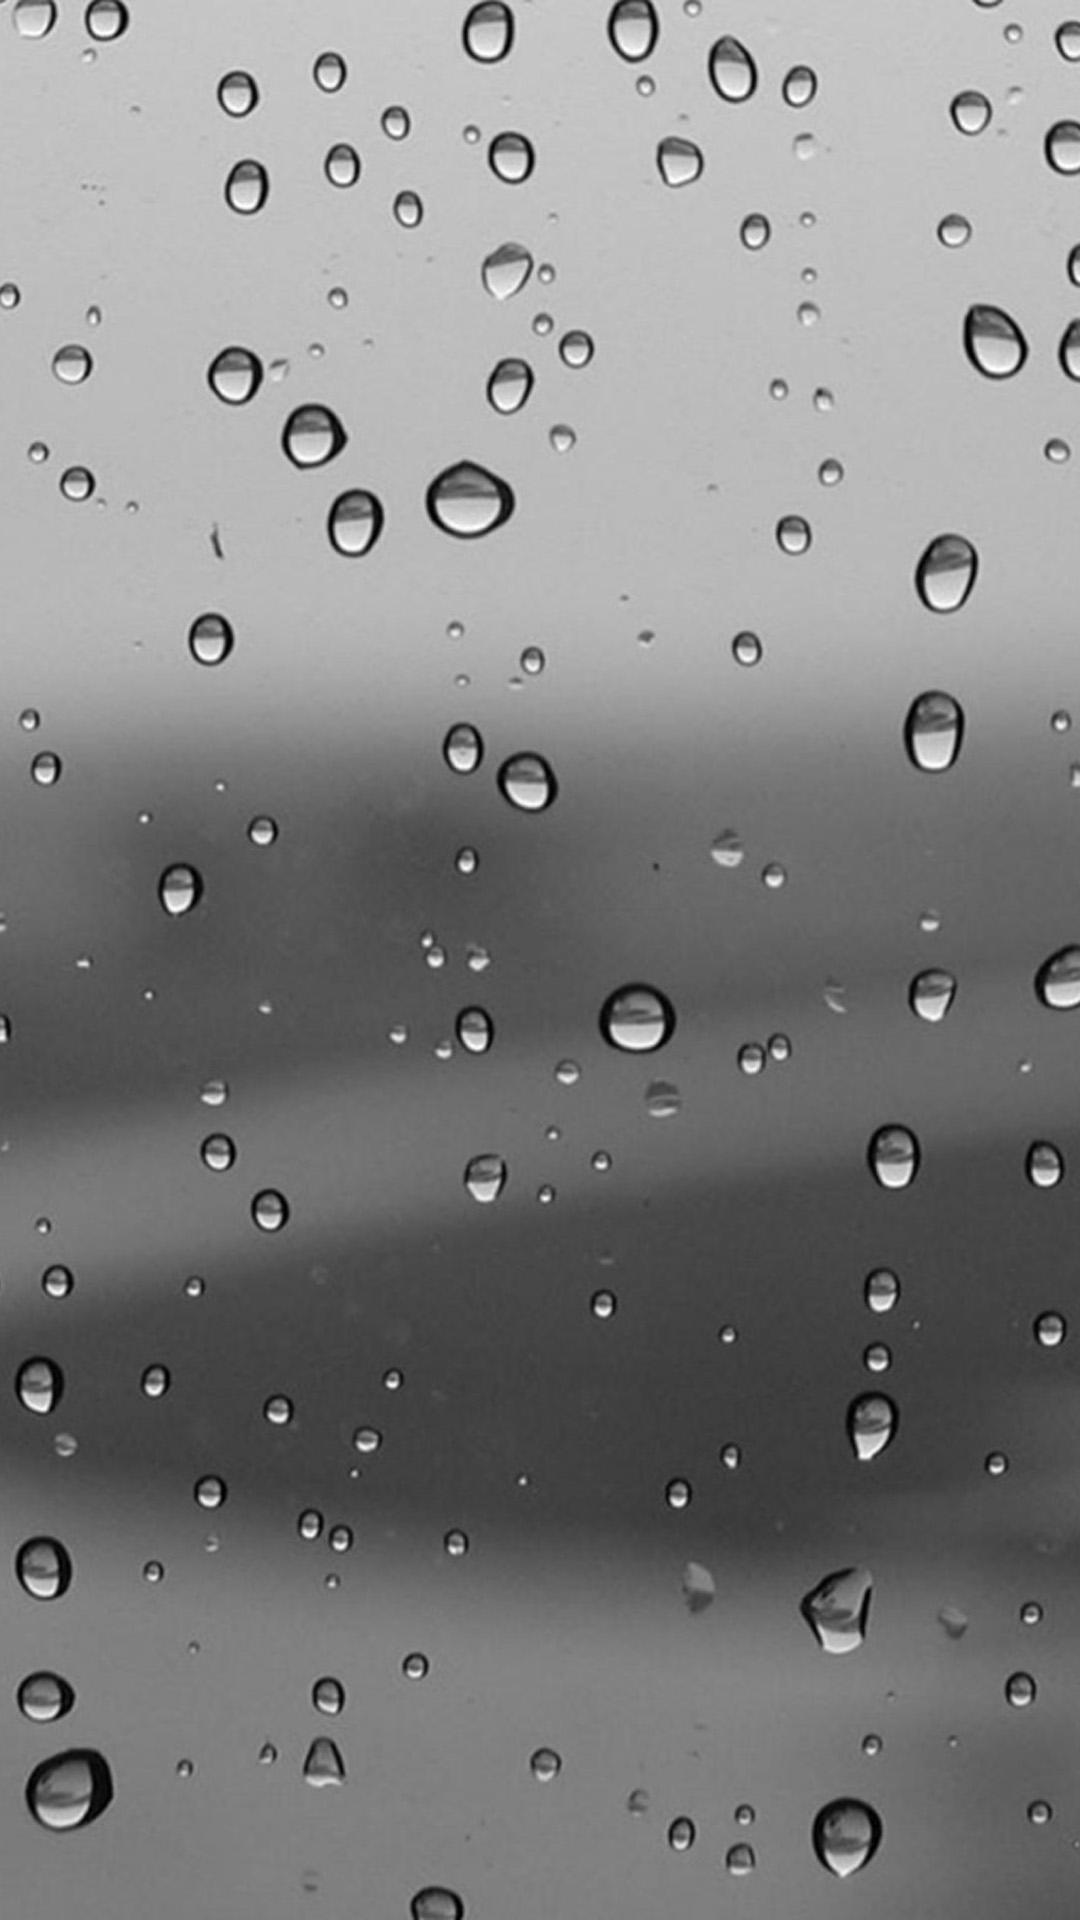 Wallpaper Weekends: Water Droplets for the iPhone 6 Plus